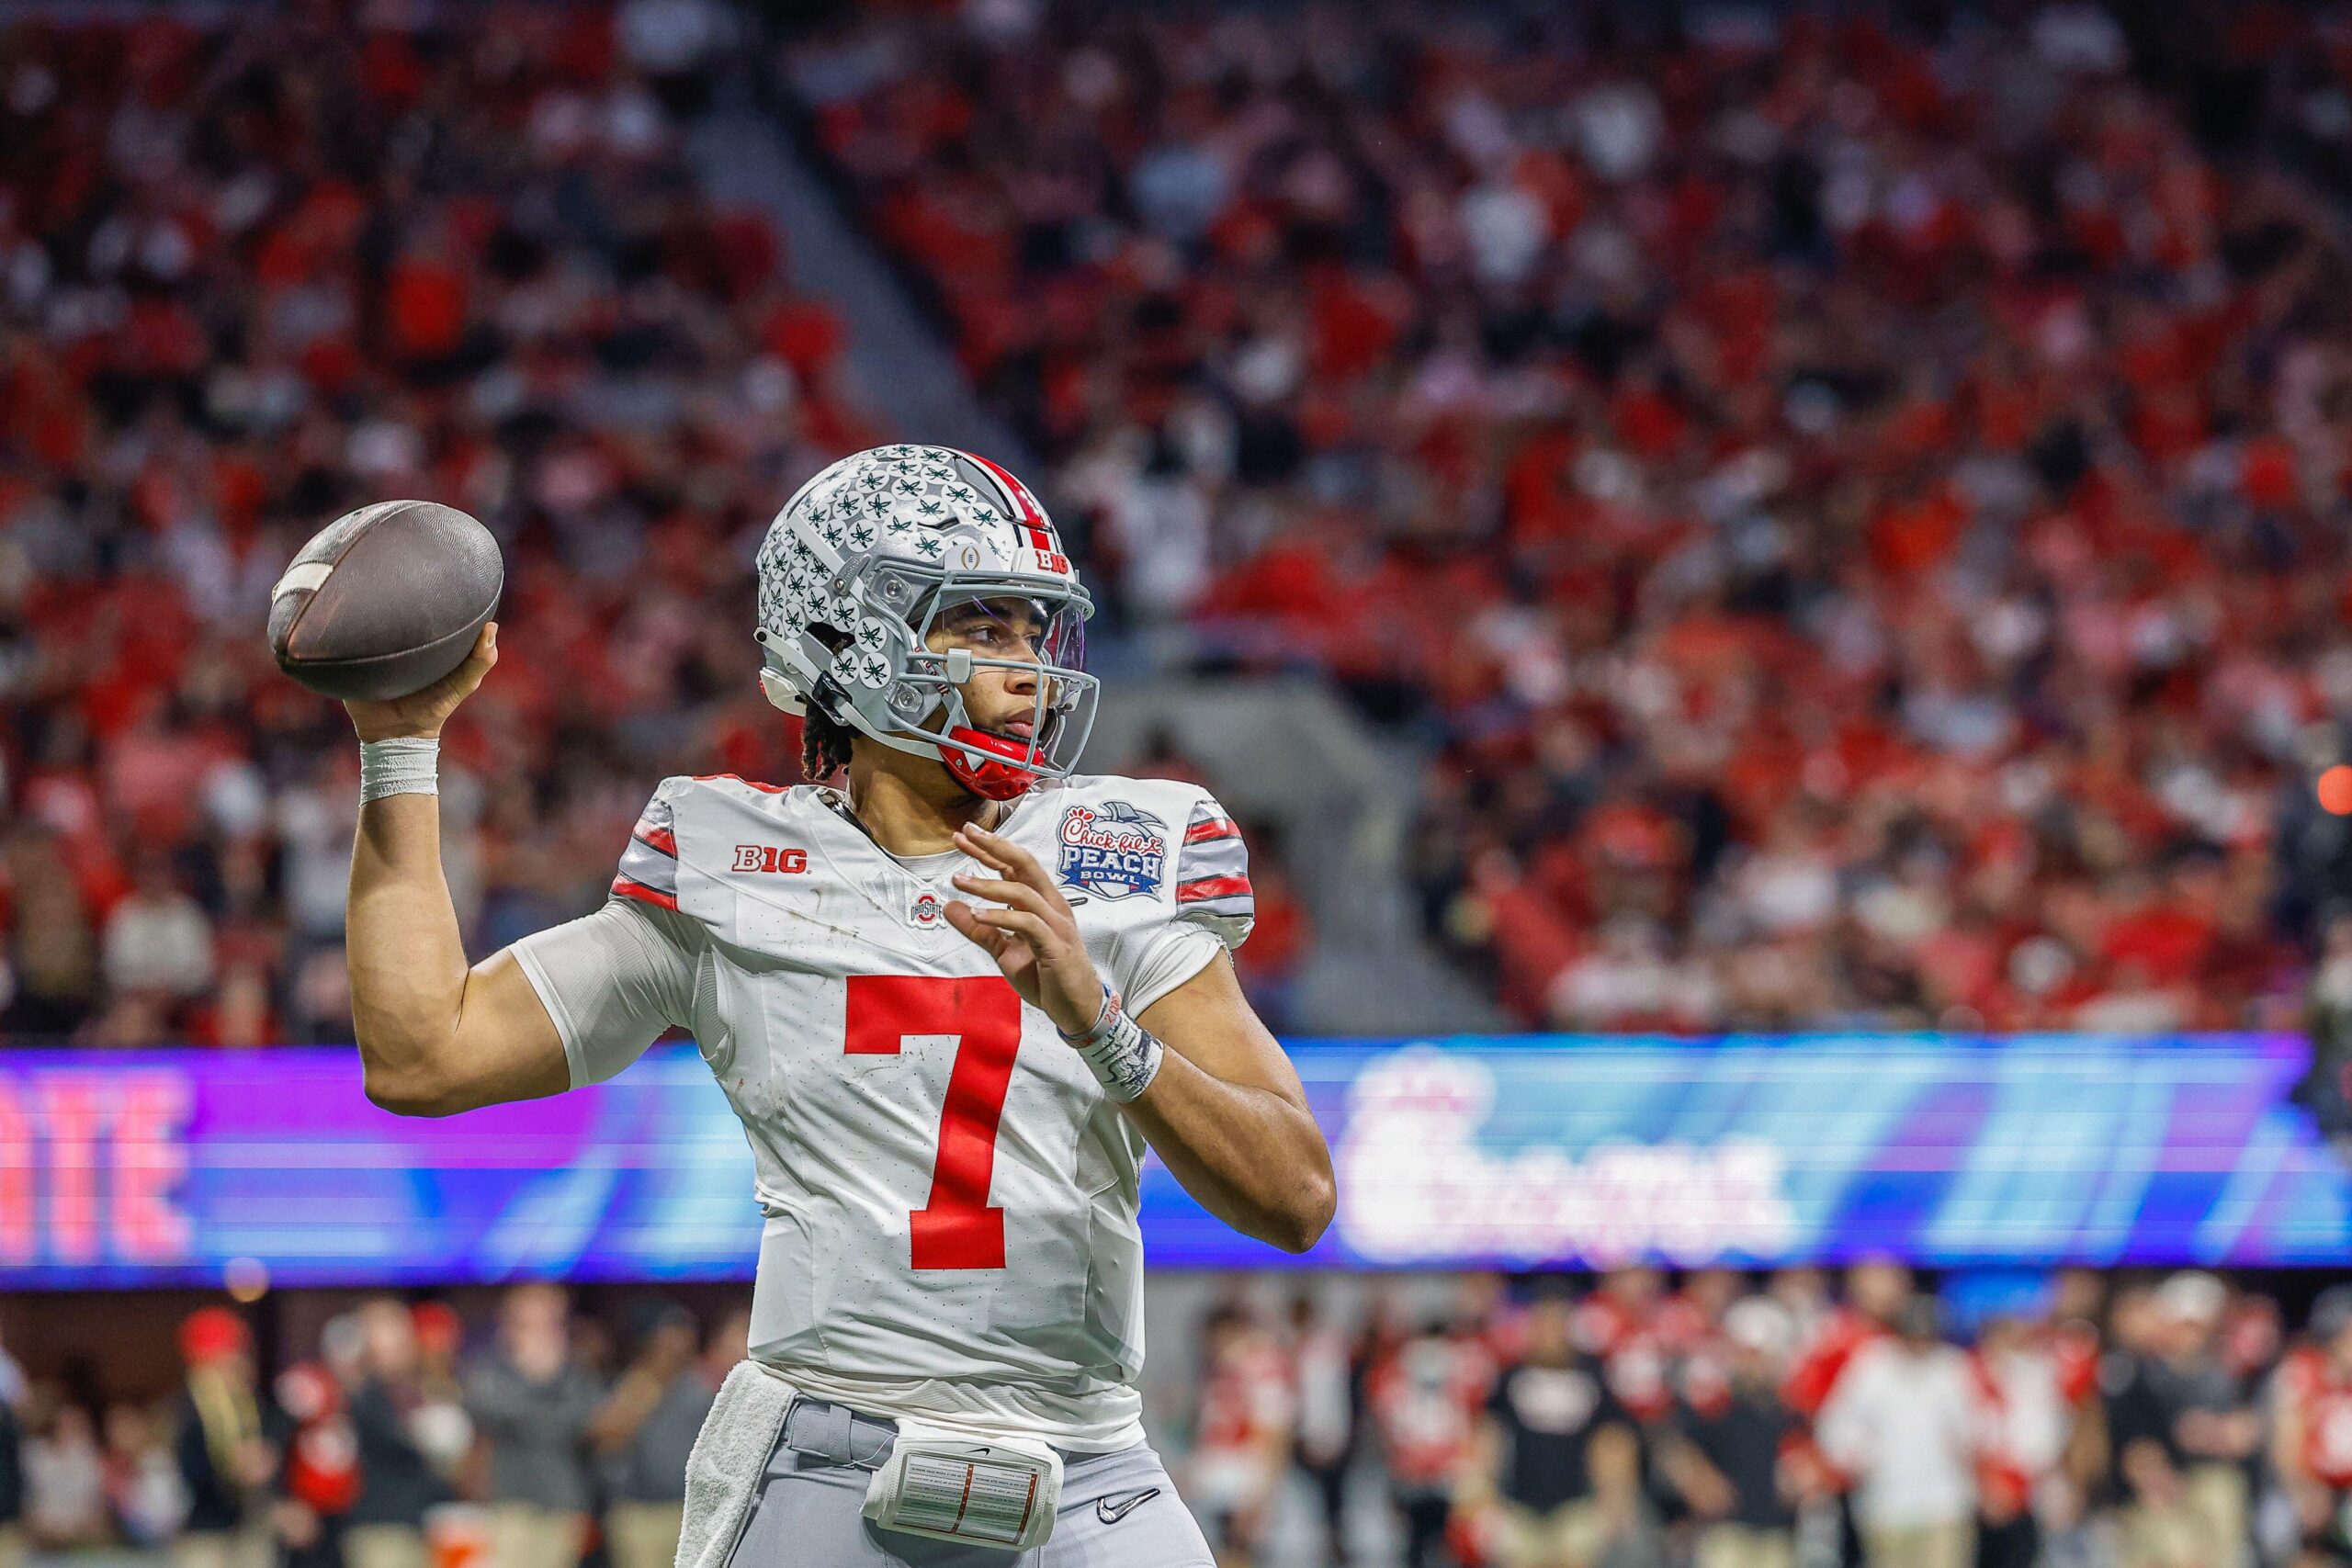 2023 NFL Draft: Examining The Passing Profile And Accuracy Of The Top Quarterback Prospects